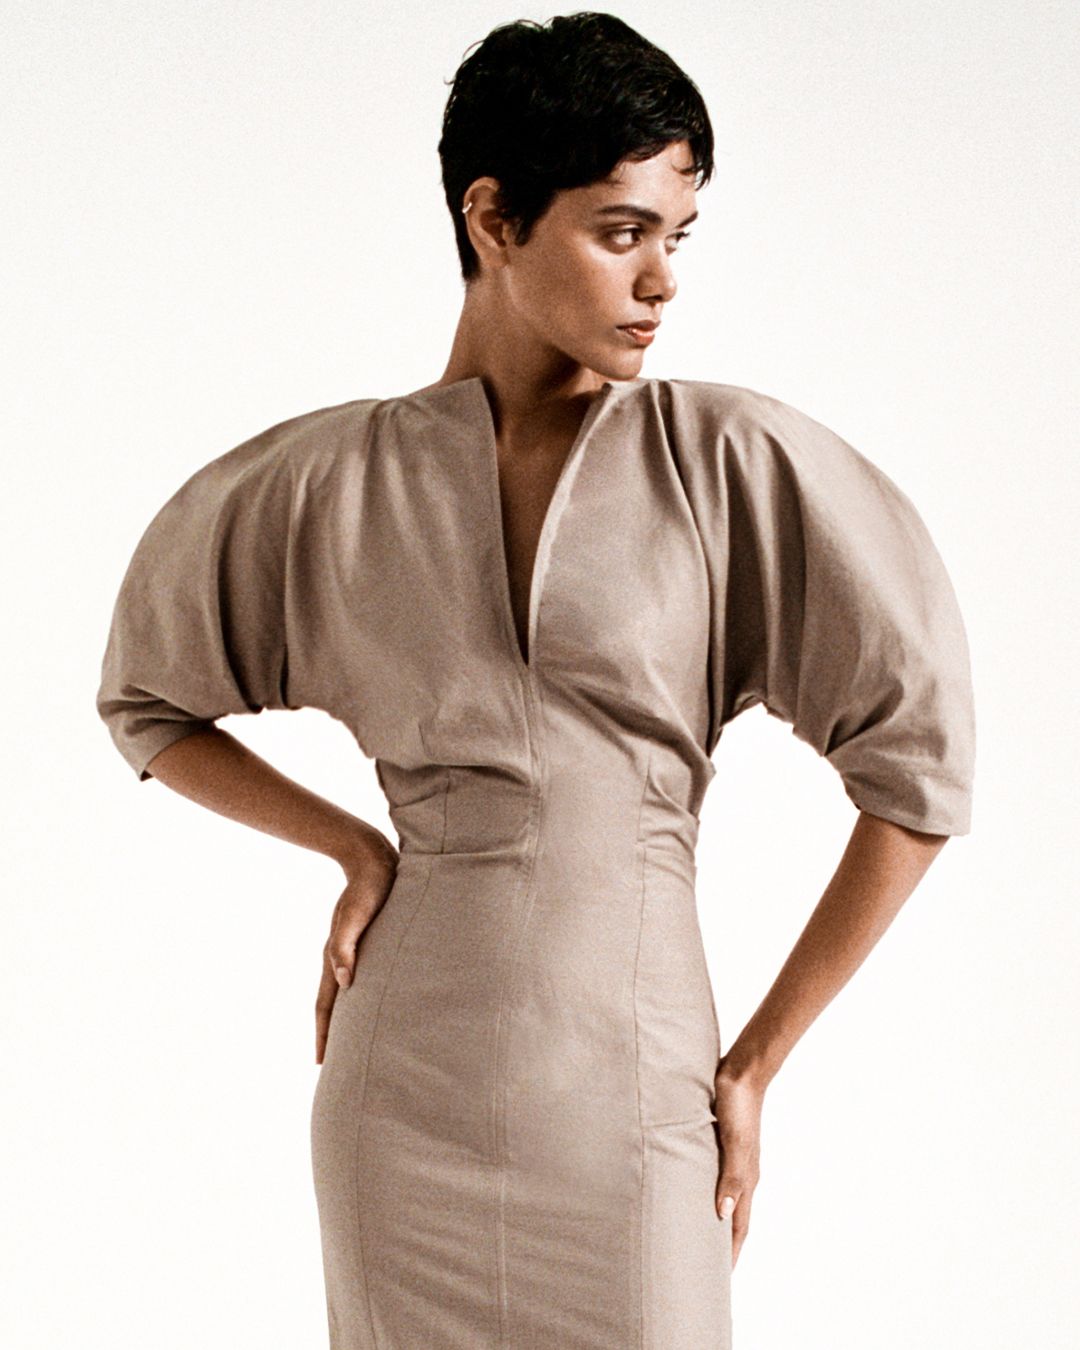 Zinnia Kumar posing with hands on hips in a fitted taupe dress with voluminous sleeves